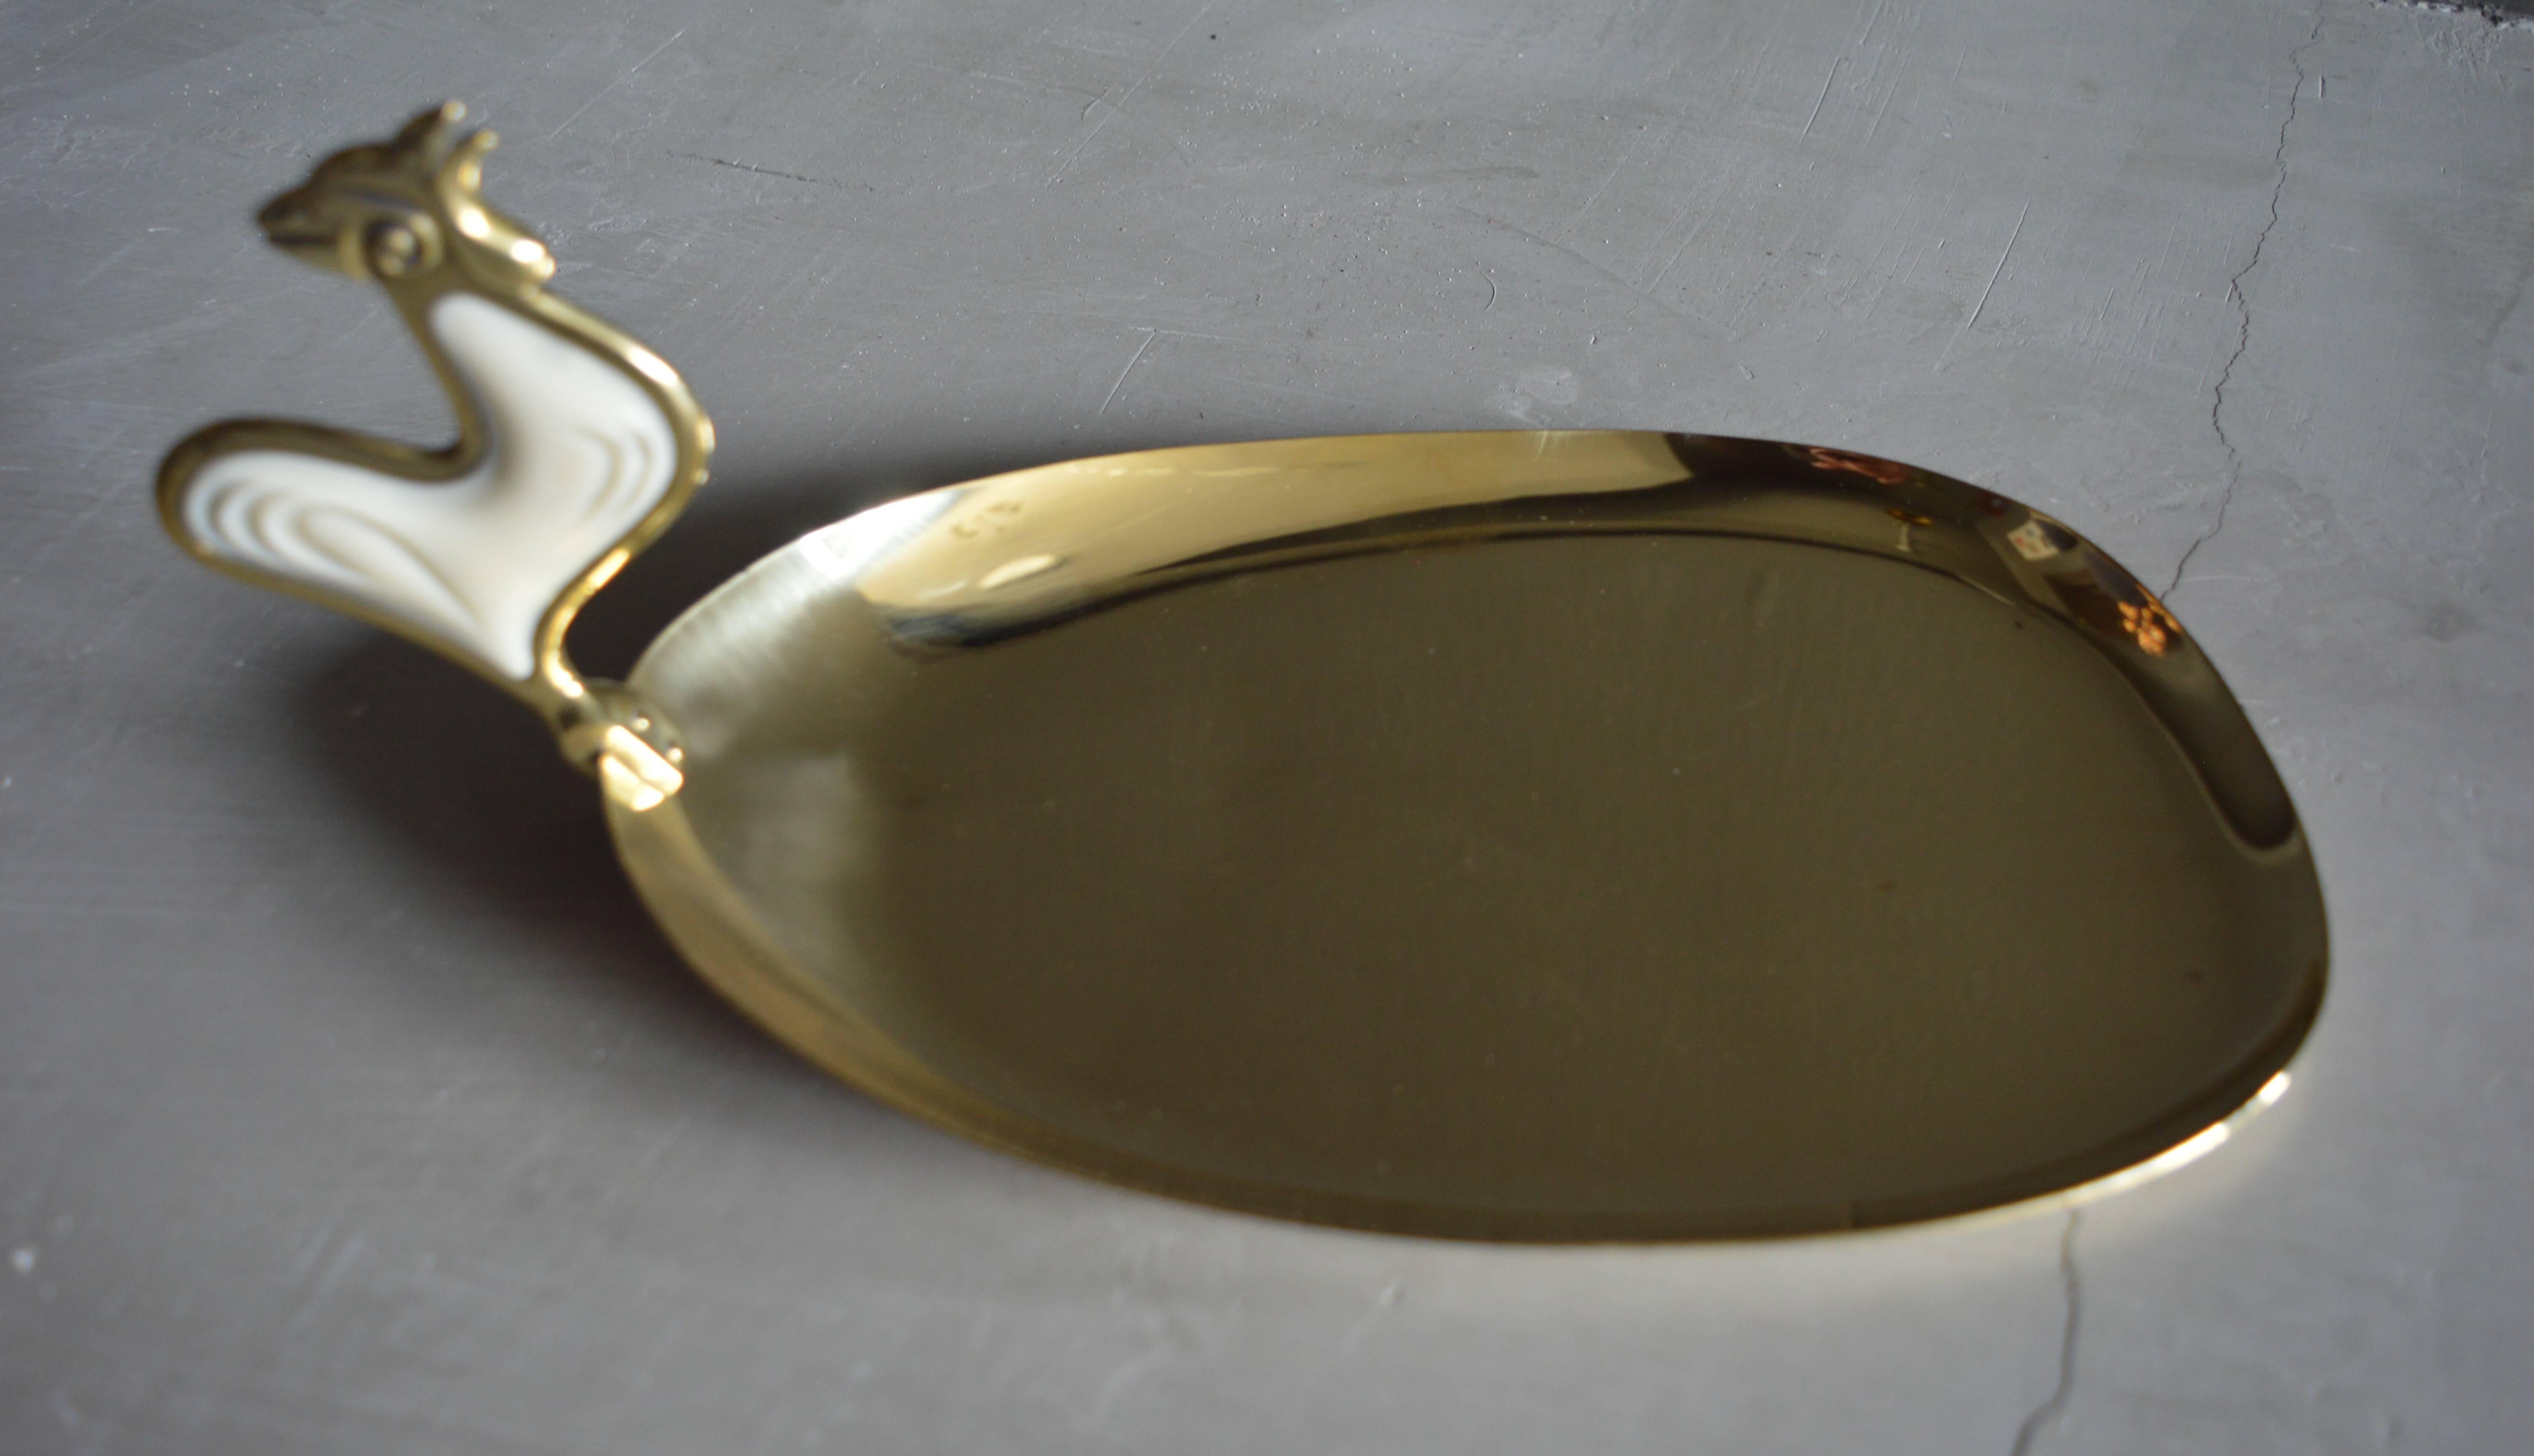 Handsome German brass tray with poised rooster handle. Great patina and age to brass. Perfect mid-sized tray for objects or serving. Excellent vintage condition.